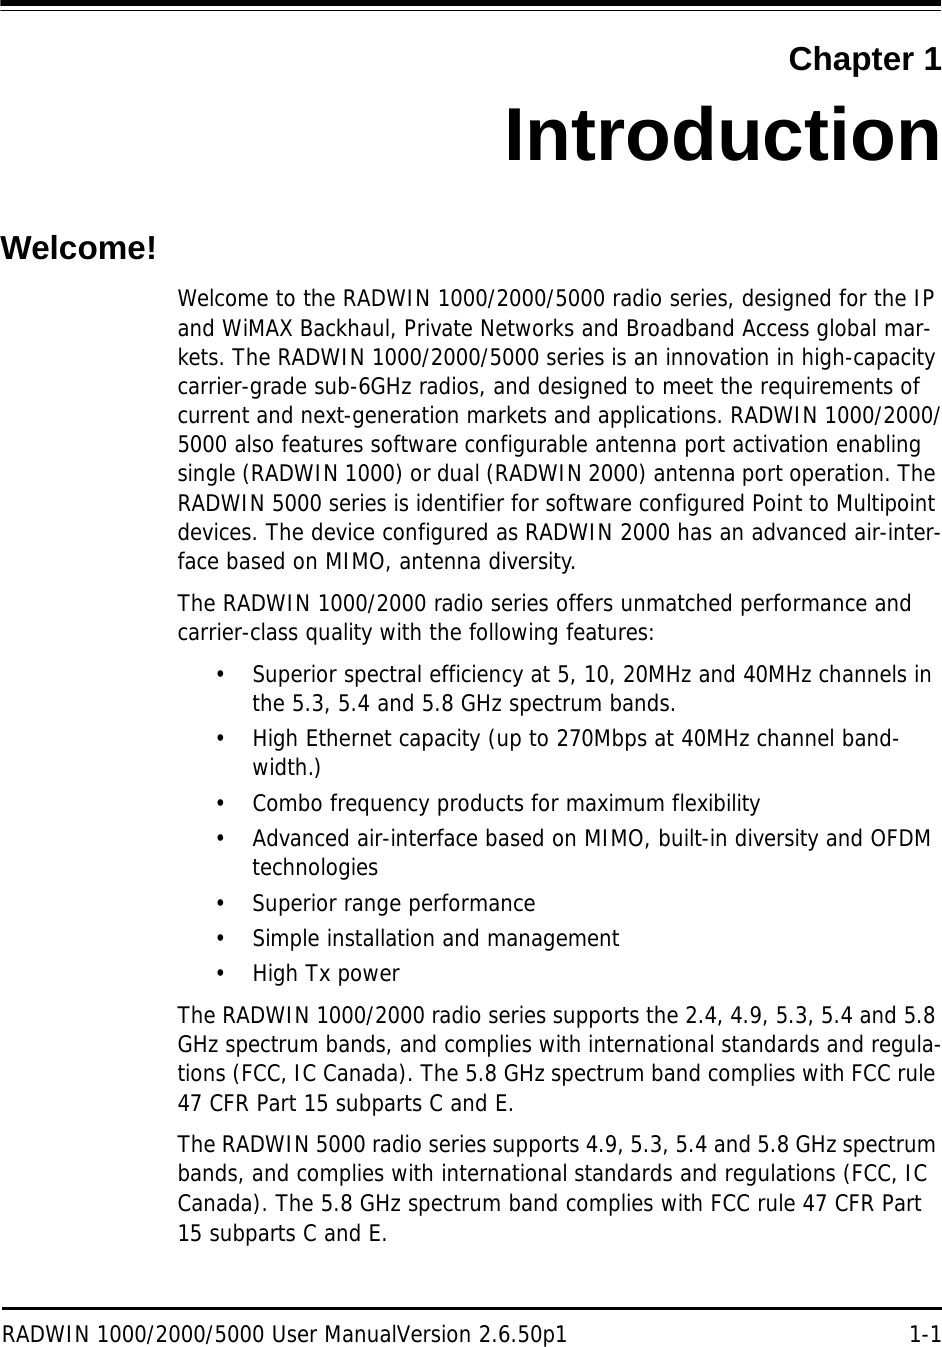 RADWIN 1000/2000/5000 User ManualVersion 2.6.50p1 1-1Chapter 1IntroductionWelcome!Welcome to the RADWIN 1000/2000/5000 radio series, designed for the IP and WiMAX Backhaul, Private Networks and Broadband Access global mar-kets. The RADWIN 1000/2000/5000 series is an innovation in high-capacity carrier-grade sub-6GHz radios, and designed to meet the requirements of current and next-generation markets and applications. RADWIN 1000/2000/5000 also features software configurable antenna port activation enabling single (RADWIN 1000) or dual (RADWIN 2000) antenna port operation. The RADWIN 5000 series is identifier for software configured Point to Multipoint devices. The device configured as RADWIN 2000 has an advanced air-inter-face based on MIMO, antenna diversity.The RADWIN 1000/2000 radio series offers unmatched performance and carrier-class quality with the following features:• Superior spectral efficiency at 5, 10, 20MHz and 40MHz channels in the 5.3, 5.4 and 5.8 GHz spectrum bands.• High Ethernet capacity (up to 270Mbps at 40MHz channel band-width.)• Combo frequency products for maximum flexibility • Advanced air-interface based on MIMO, built-in diversity and OFDM technologies• Superior range performance• Simple installation and management•High Tx powerThe RADWIN 1000/2000 radio series supports the 2.4, 4.9, 5.3, 5.4 and 5.8 GHz spectrum bands, and complies with international standards and regula-tions (FCC, IC Canada). The 5.8 GHz spectrum band complies with FCC rule 47 CFR Part 15 subparts C and E.The RADWIN 5000 radio series supports 4.9, 5.3, 5.4 and 5.8 GHz spectrum bands, and complies with international standards and regulations (FCC, IC Canada). The 5.8 GHz spectrum band complies with FCC rule 47 CFR Part 15 subparts C and E.